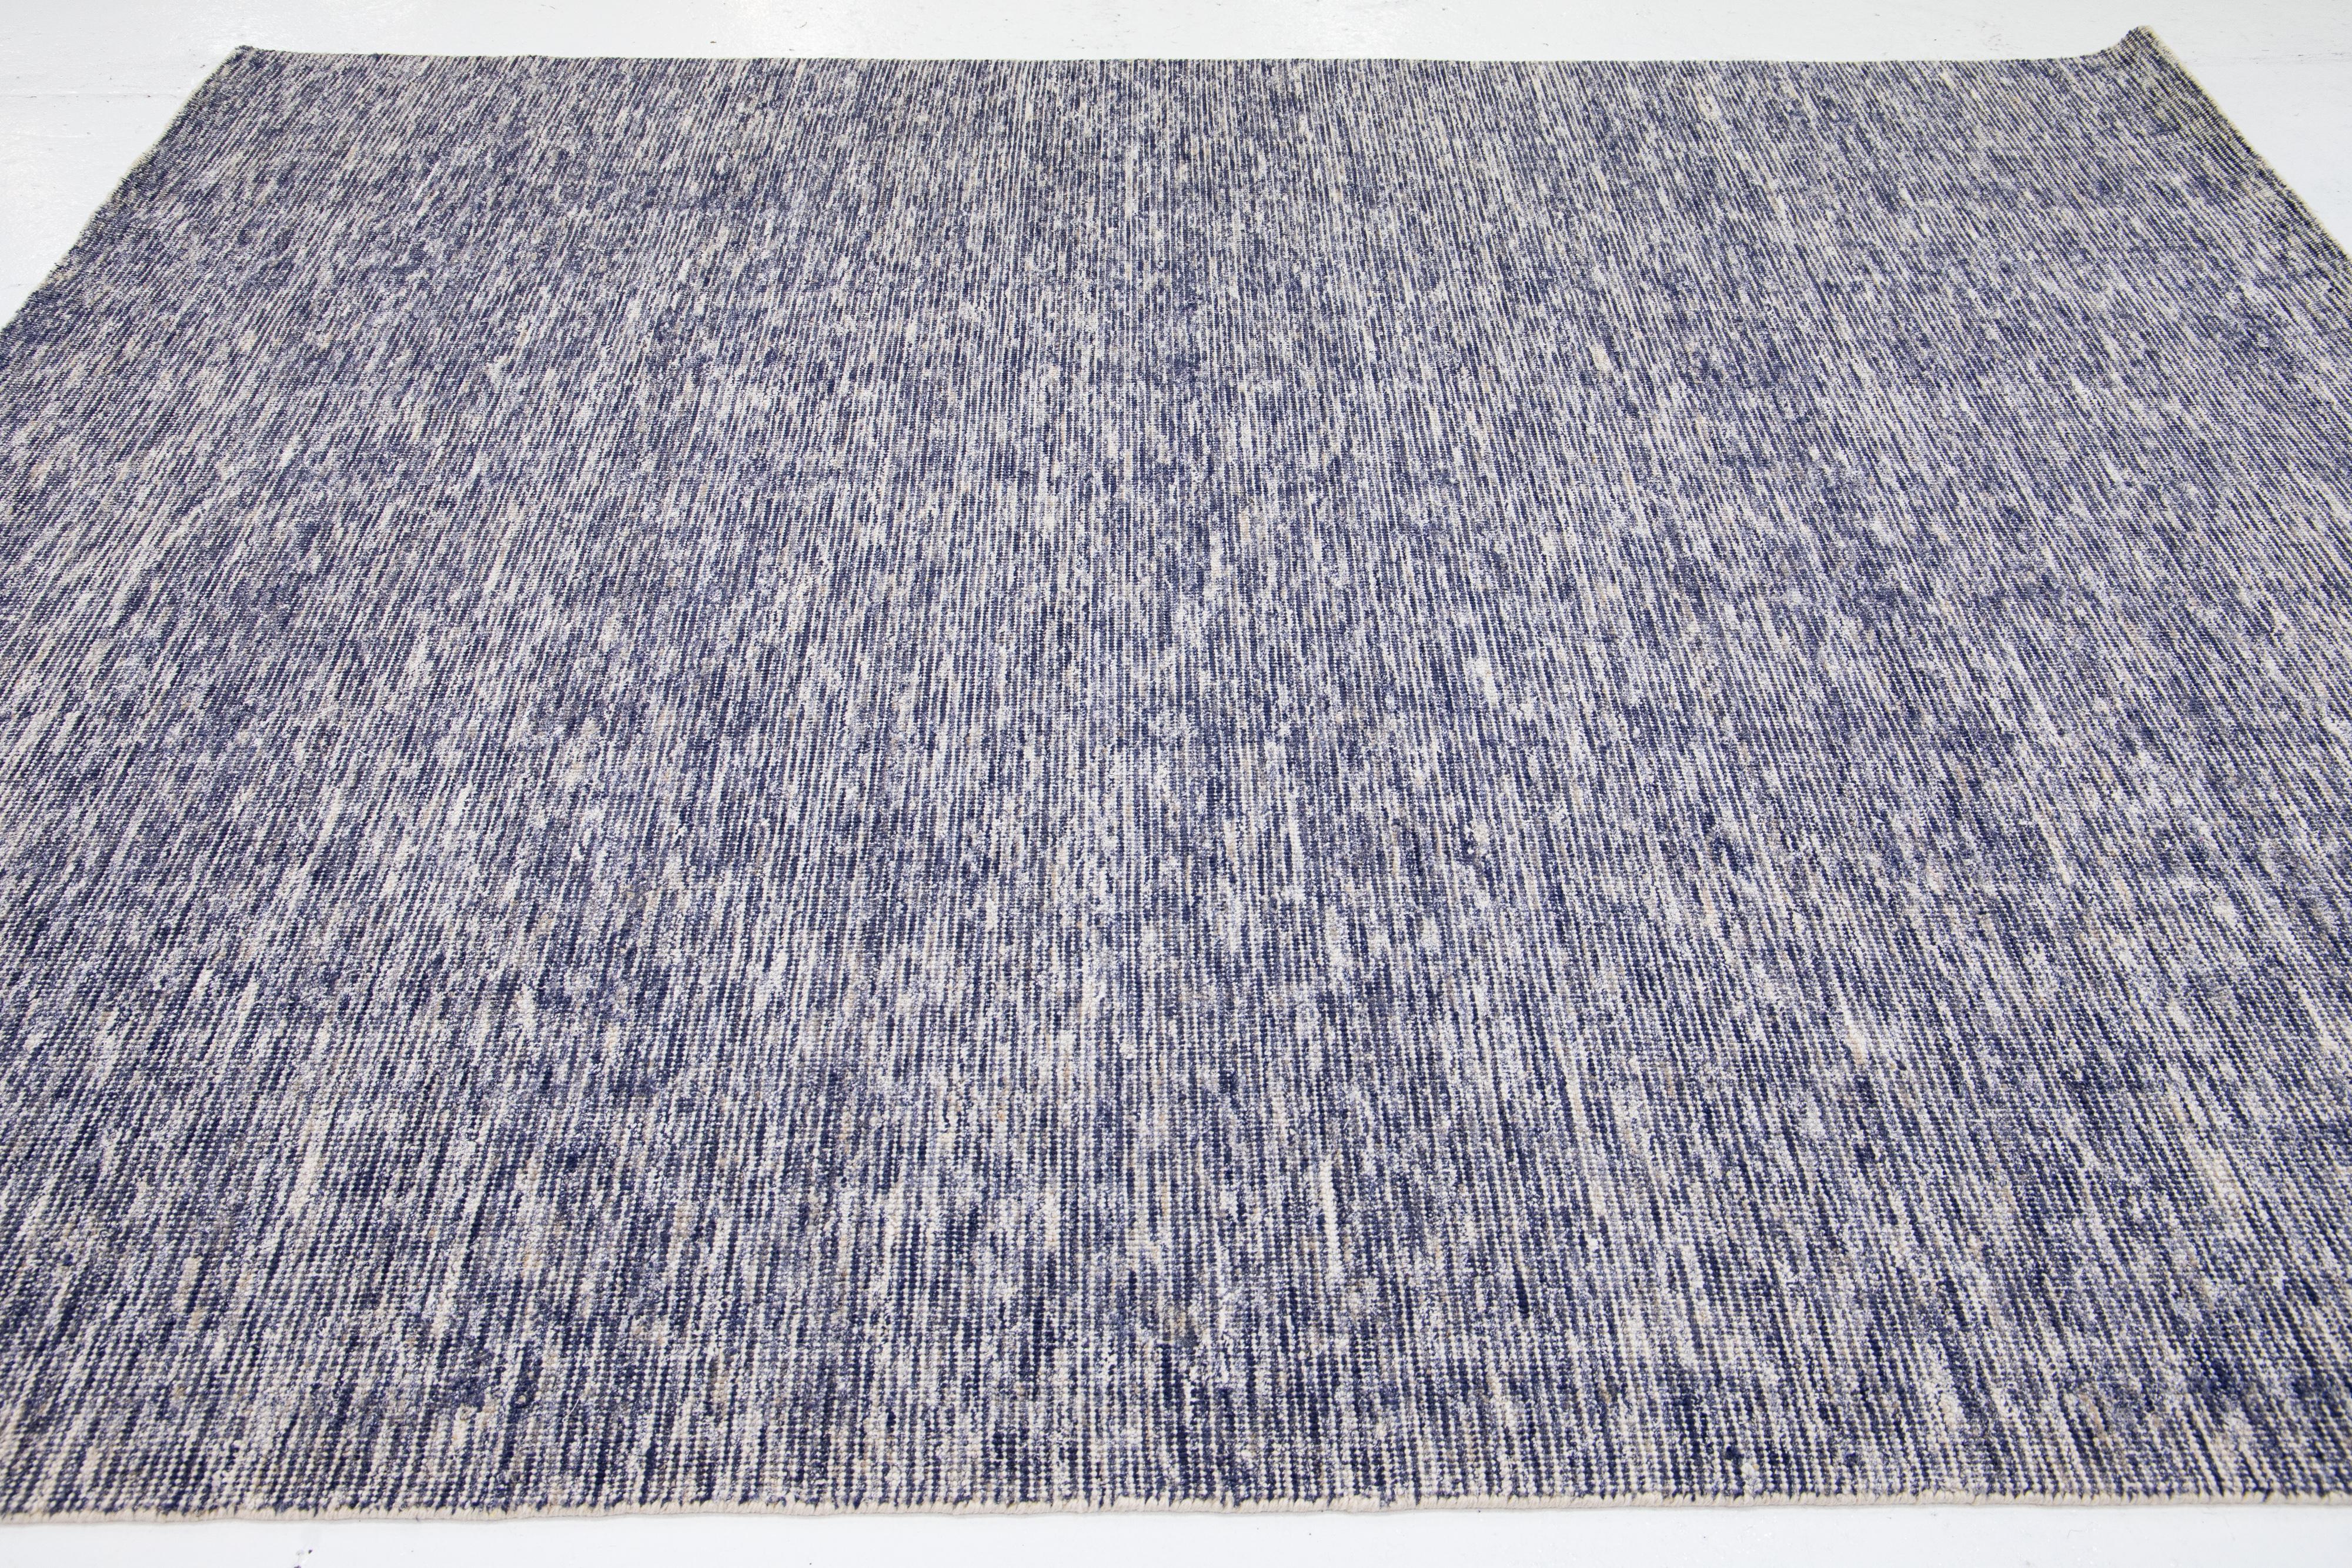 Modern Apadana's Groove Bamboo / Silk Handmade Rug in Navy Blue In New Condition For Sale In Norwalk, CT